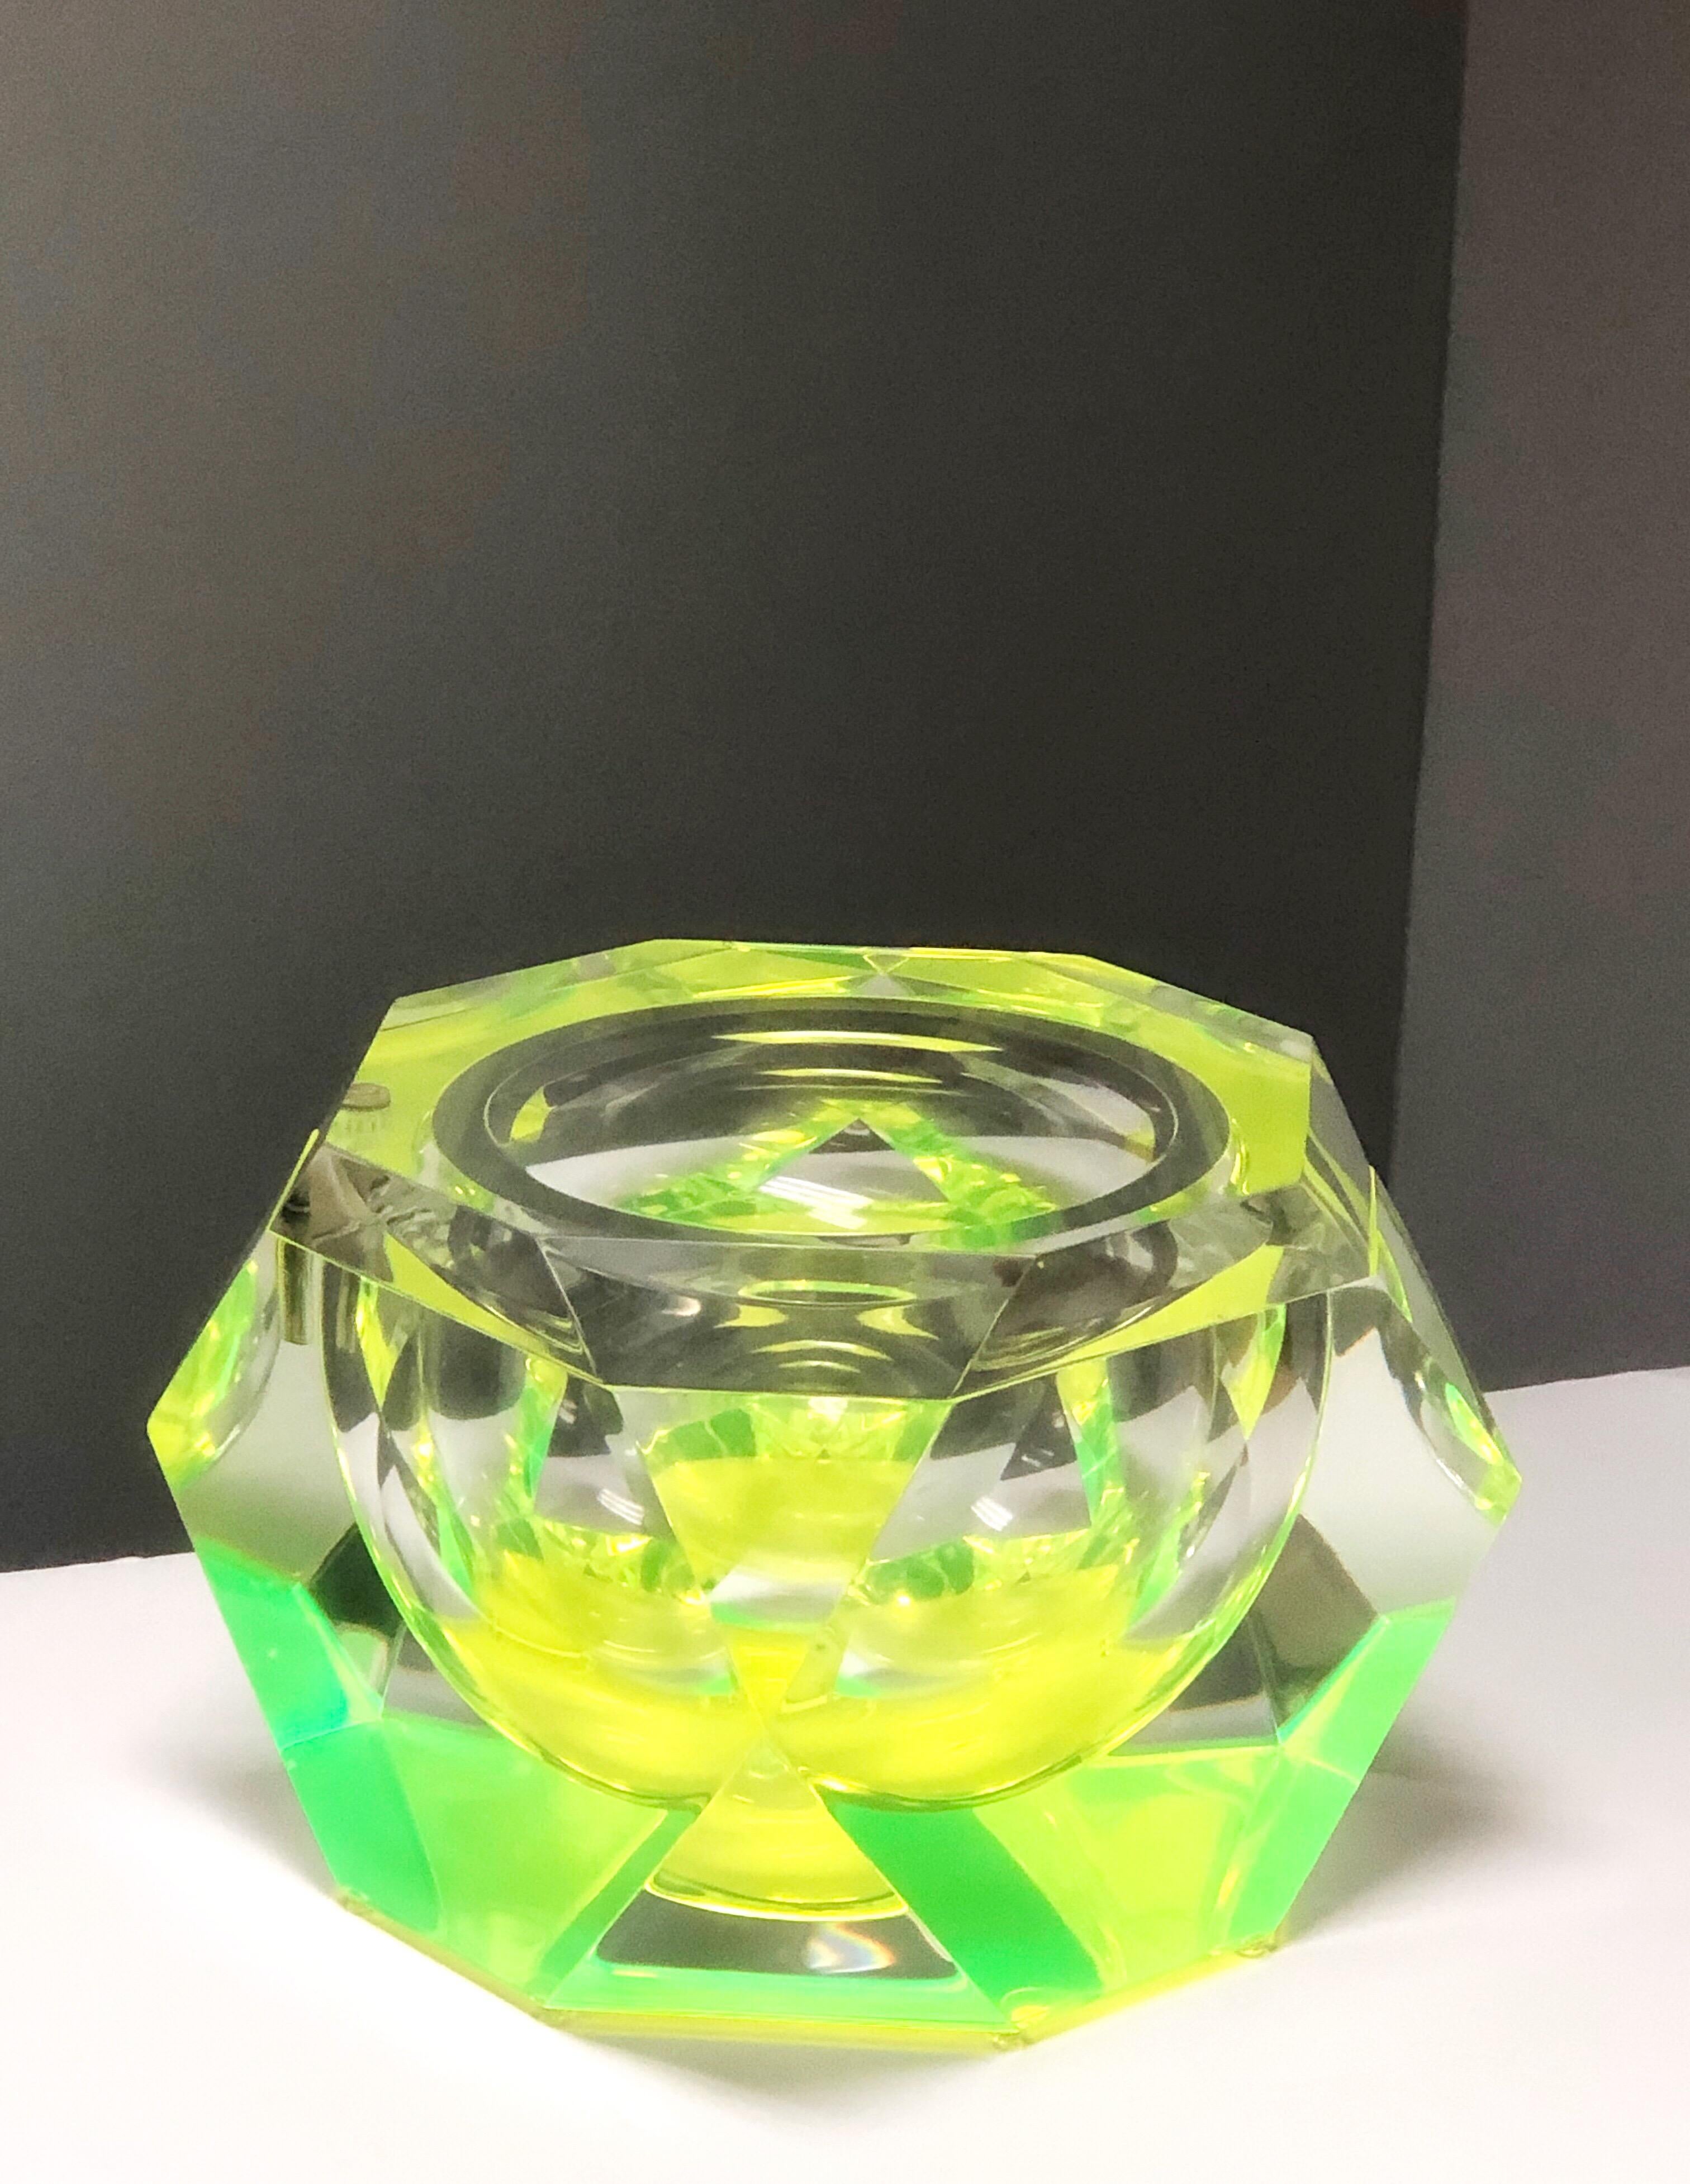 A large Lucite ice bucket, Italian 1970s. Swivel top. Lots of facets refract the neon green color.